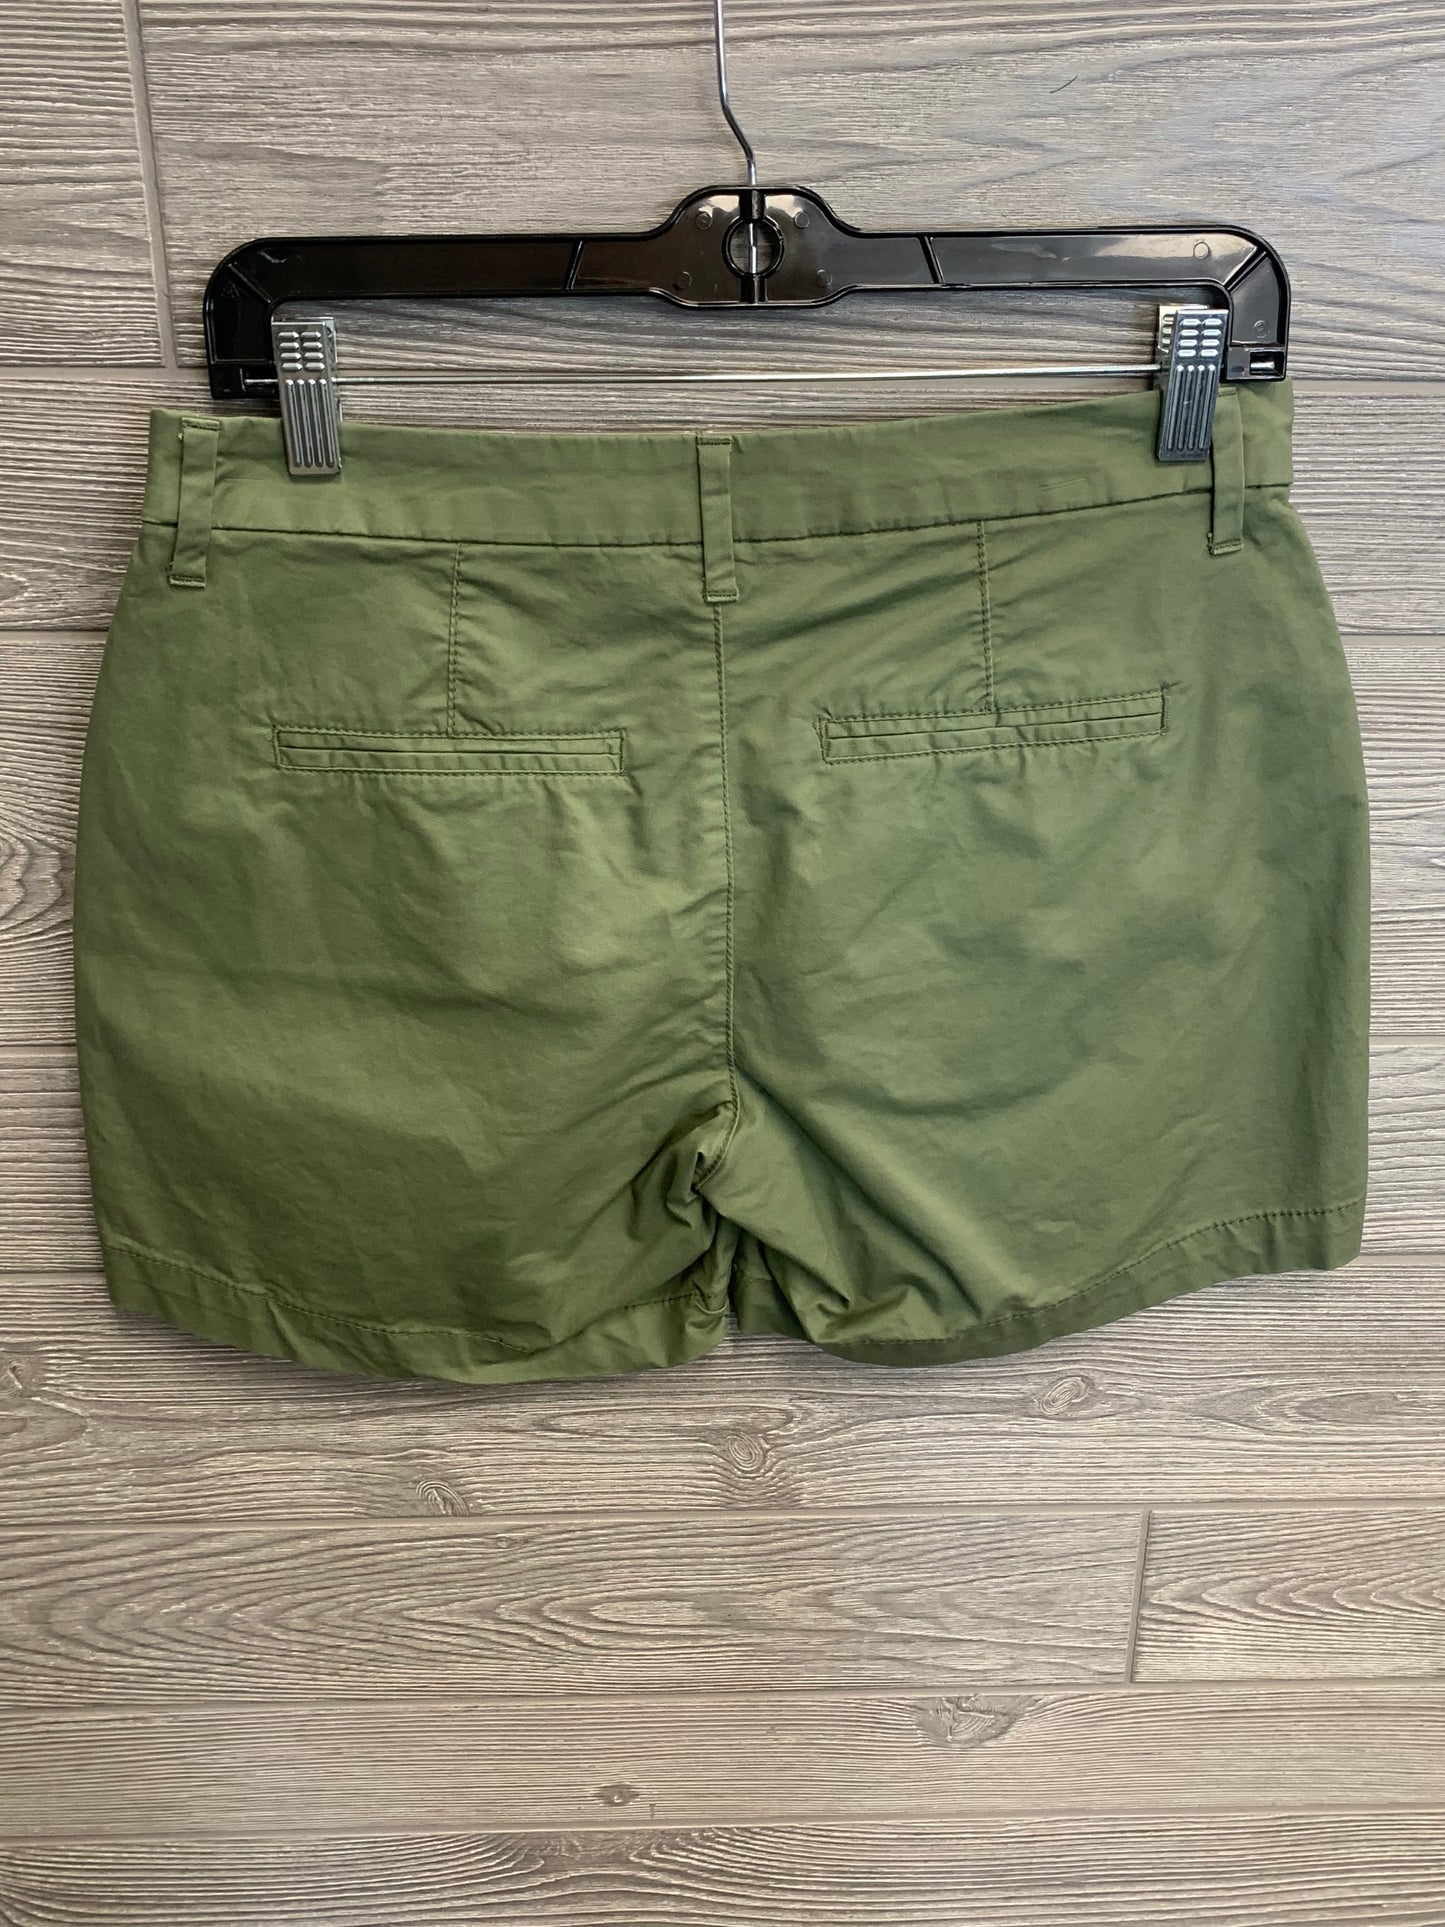 Green Shorts Old Navy, Size 2